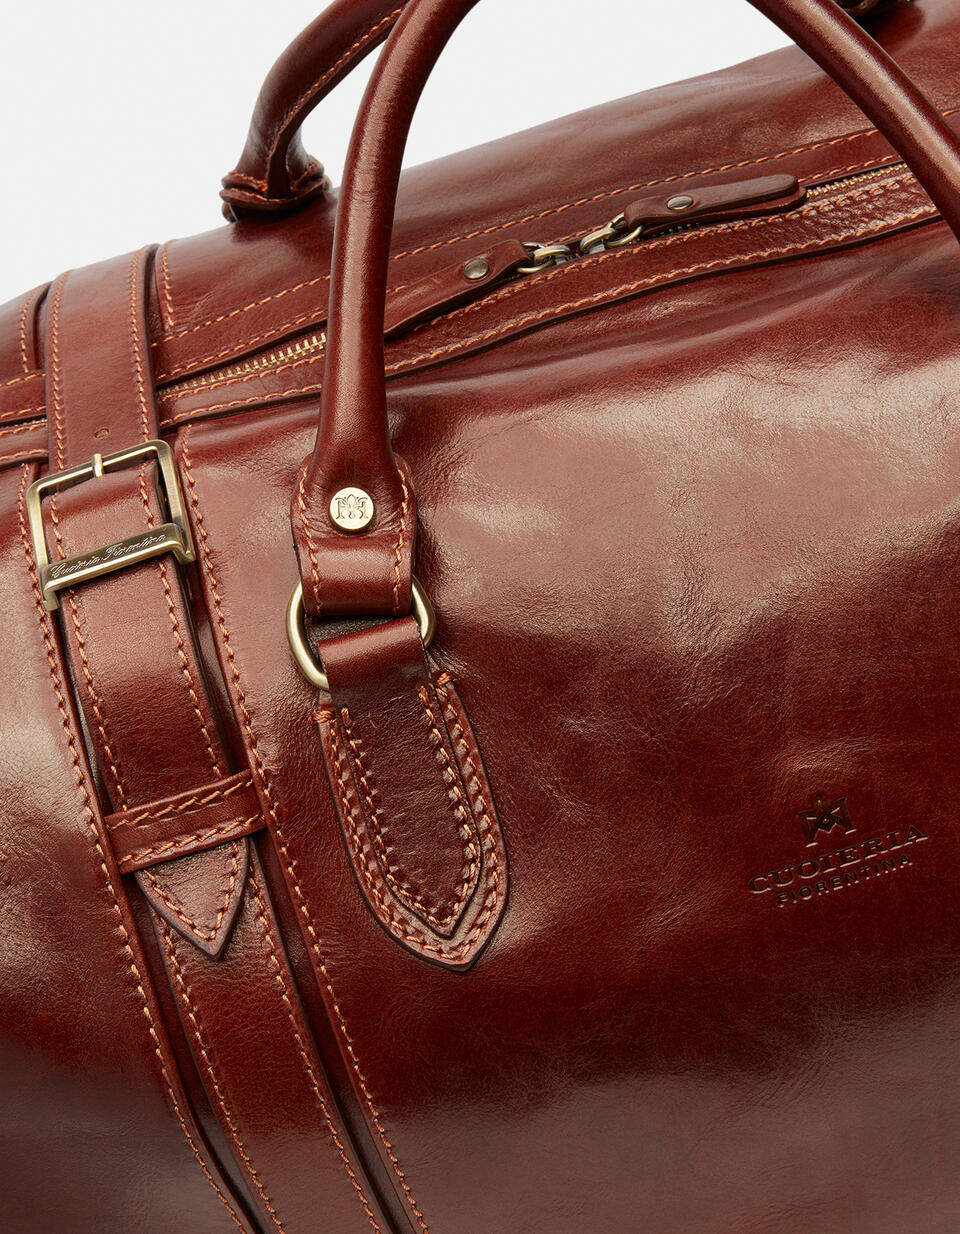 Weekender  - Luggage - Travel Bags - Cuoieria Fiorentina